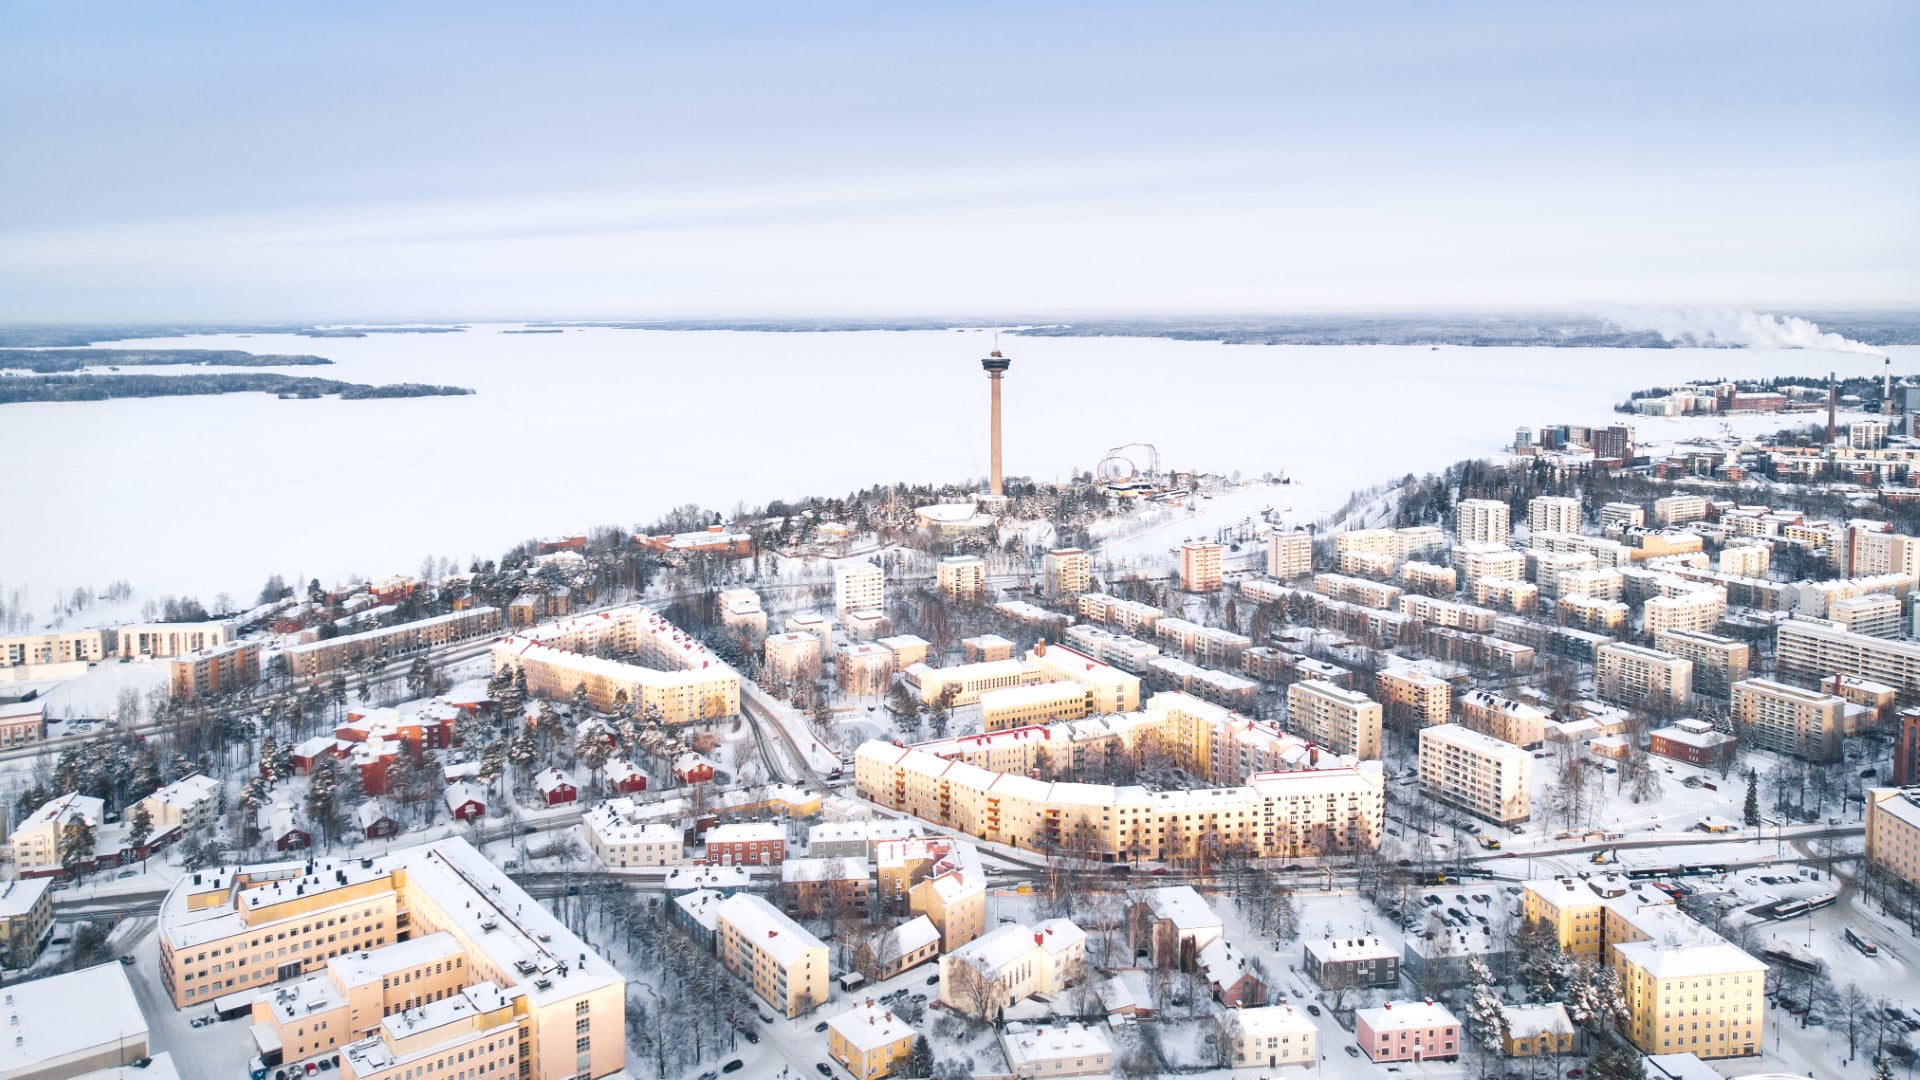 CONNECT Aviation Announces Tampere at 2022 Host City